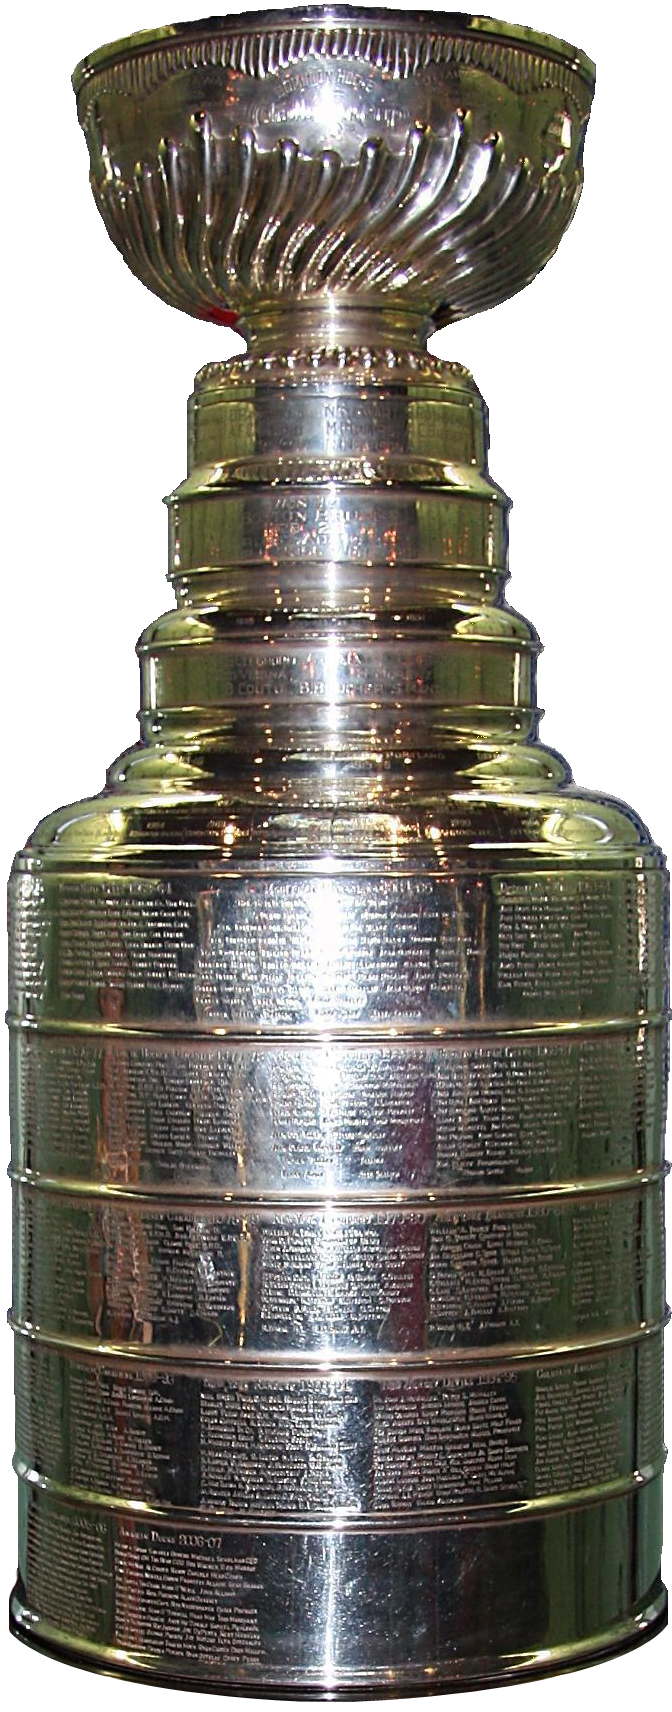 Stanley Cup - Wikipedia